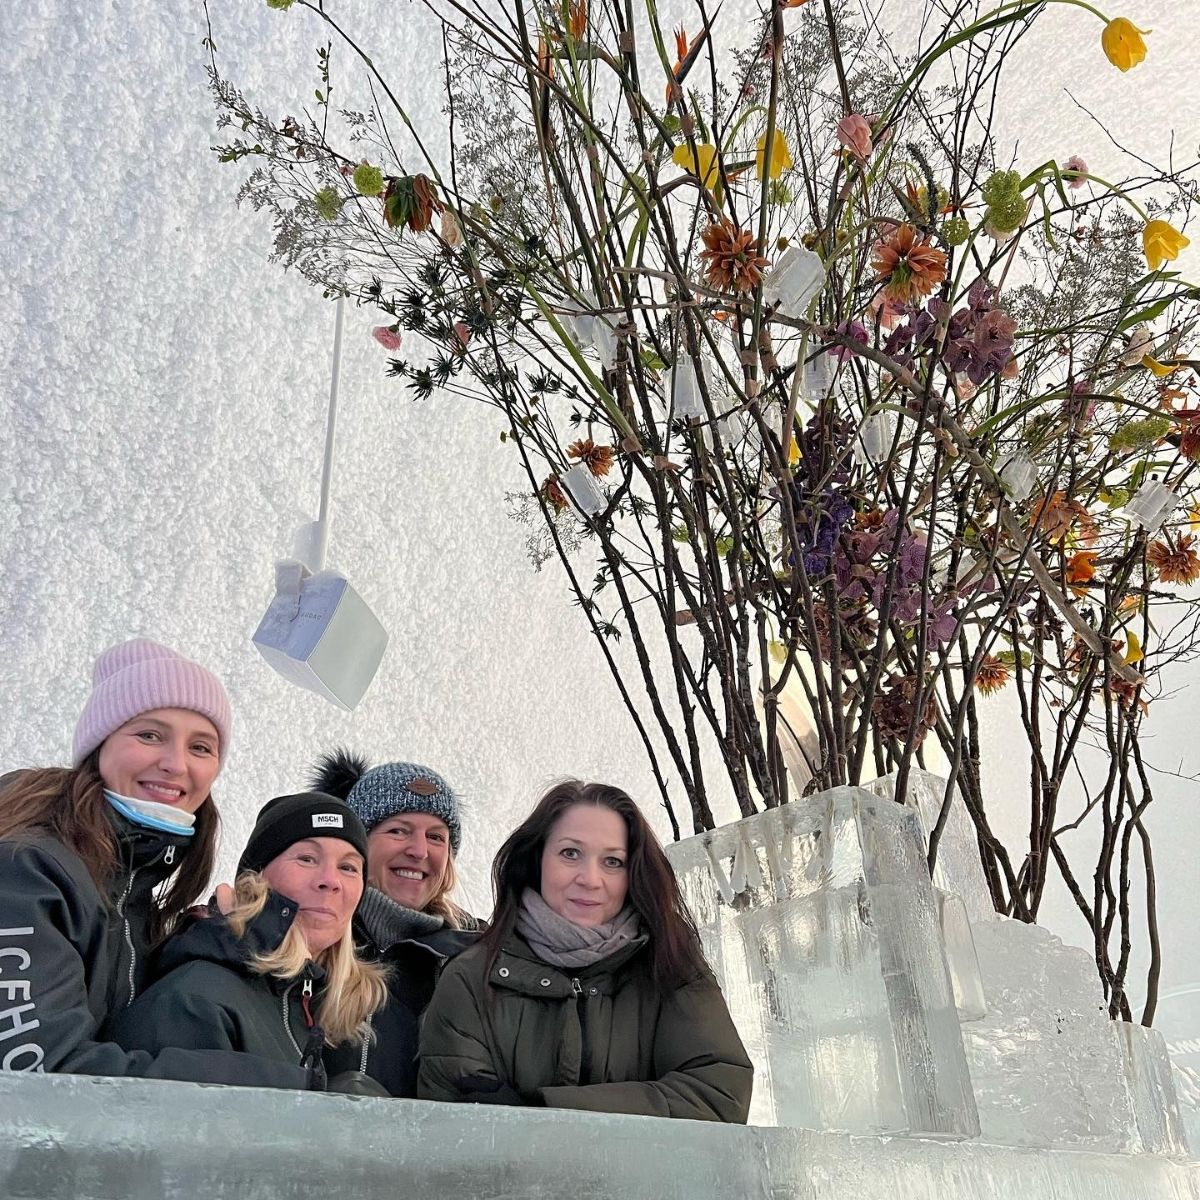 Flowers and Ice at Icehotel - On Thursd